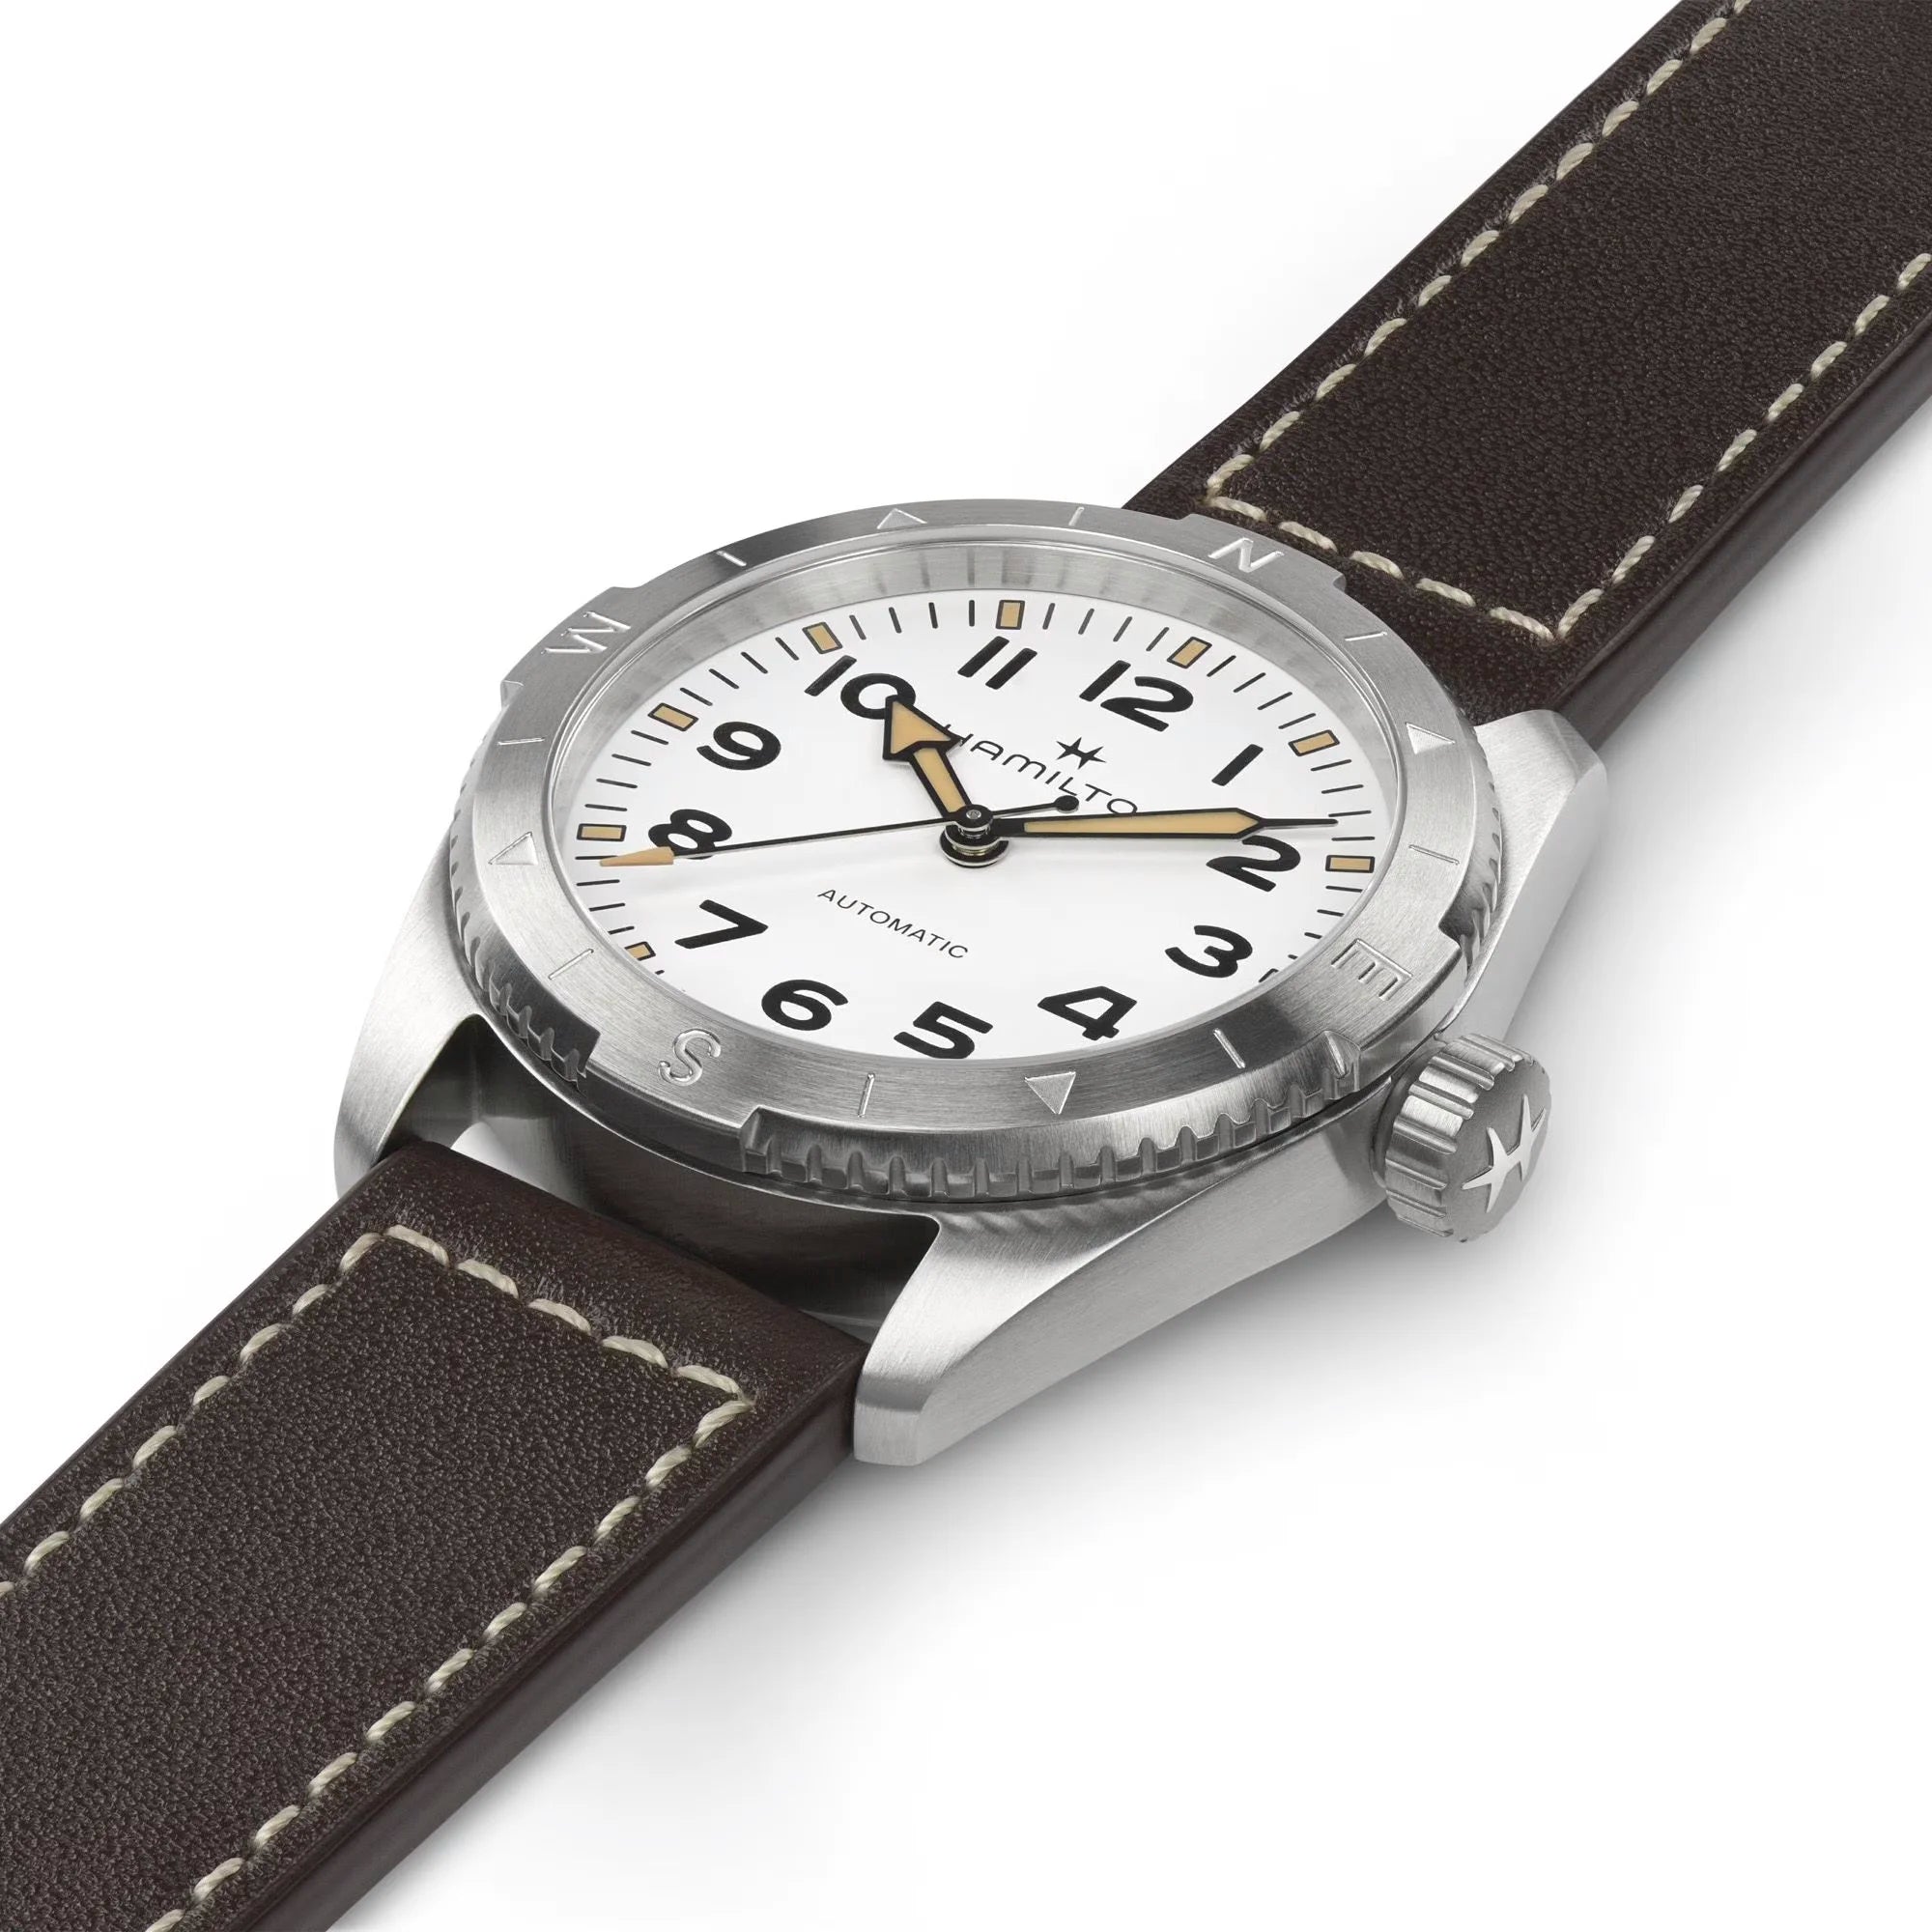 Khaki Field Expedition Auto - 37mm - H70225510